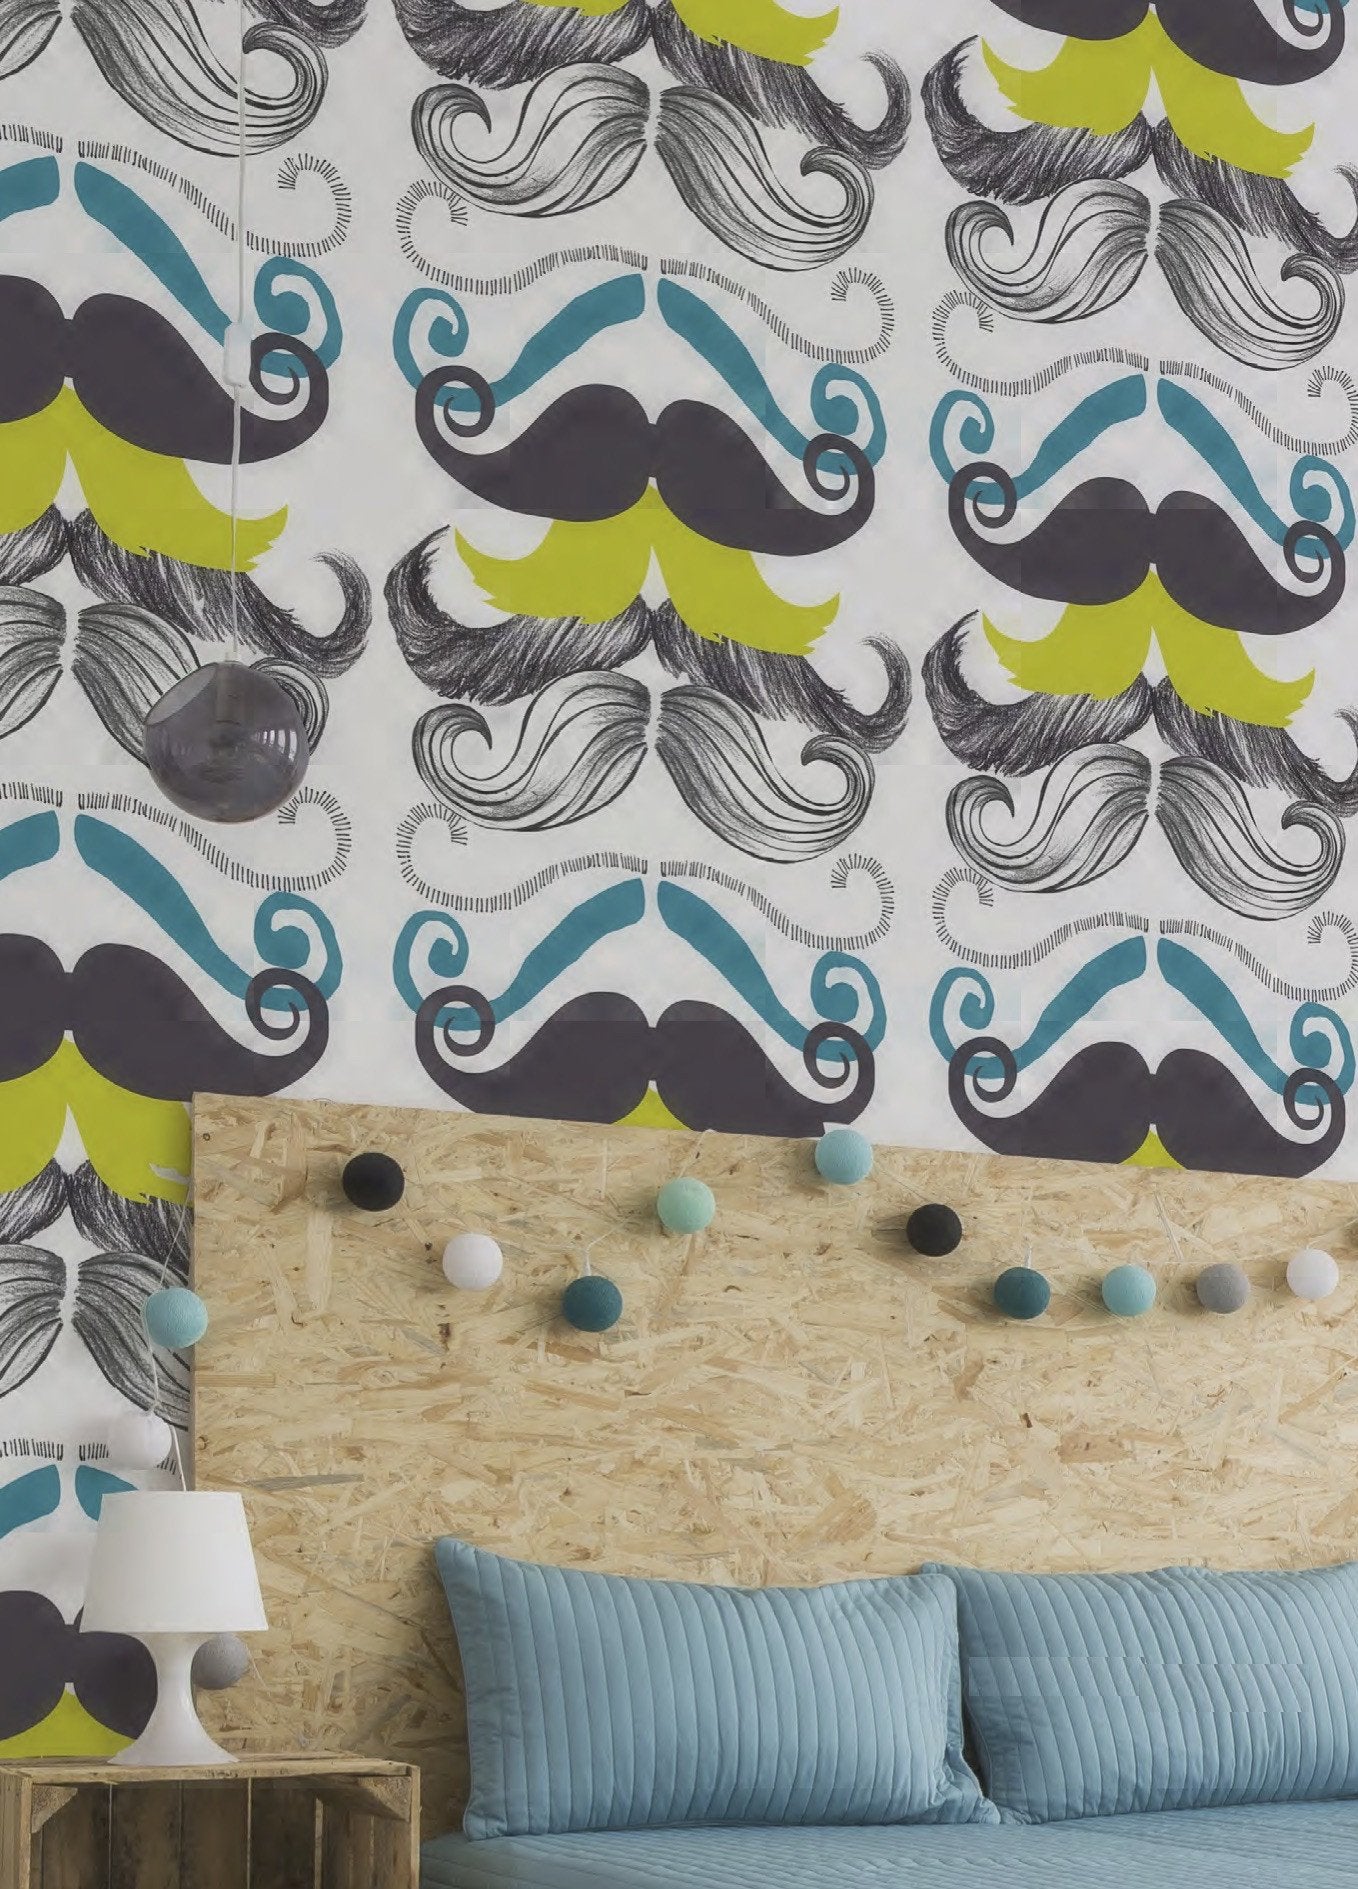 Different Moustaches Wallpaper-Mind The Gap-Contract Furniture Store